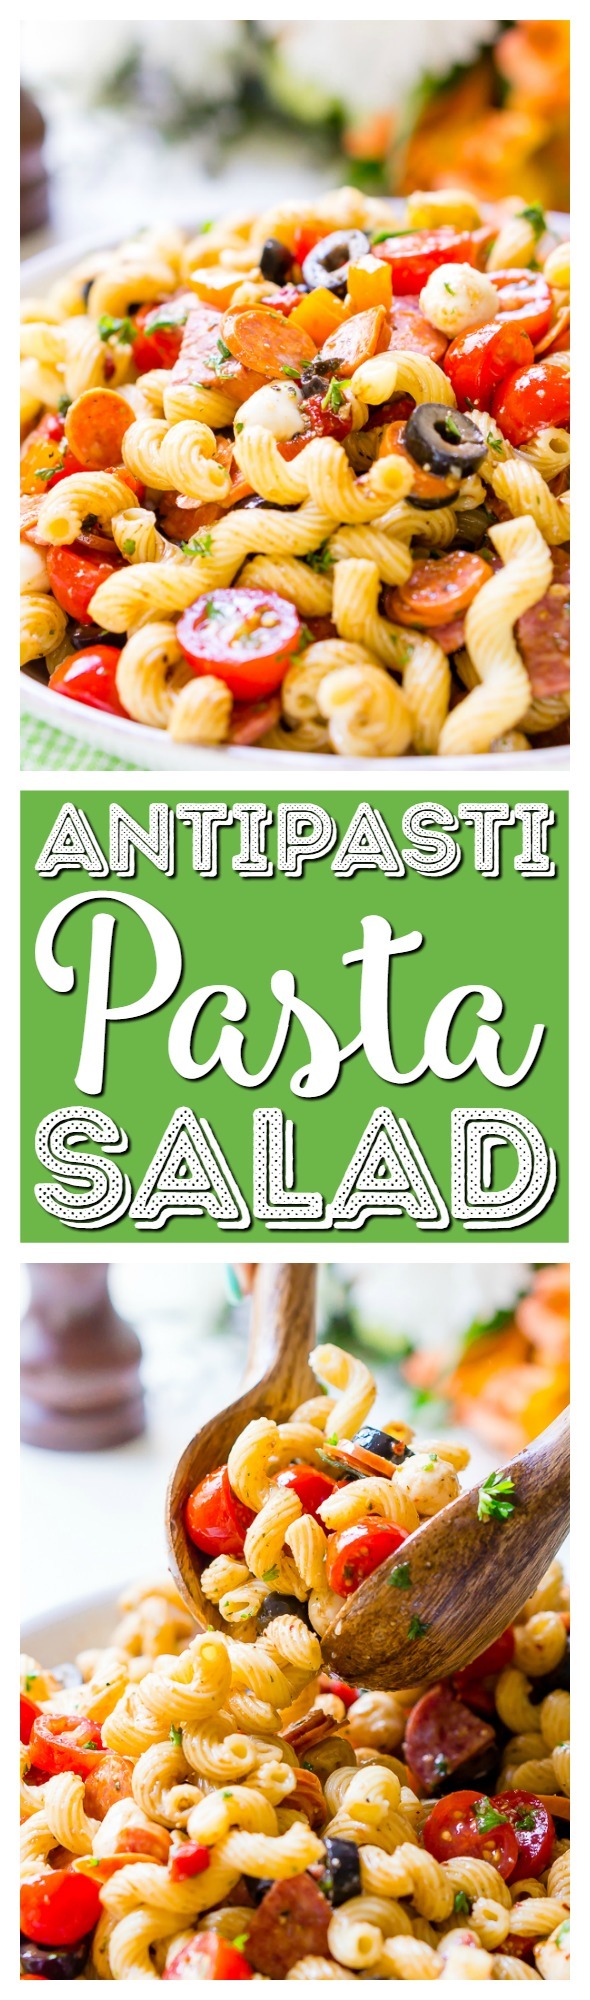 Antipasti Pasta Salad is loaded with veggies, cheeses, herbs, and meats and coated in a simple balsamic and olive oil dressing. Perfect for large get-togethers like BBQs and potlucks! via @sugarandsoulco